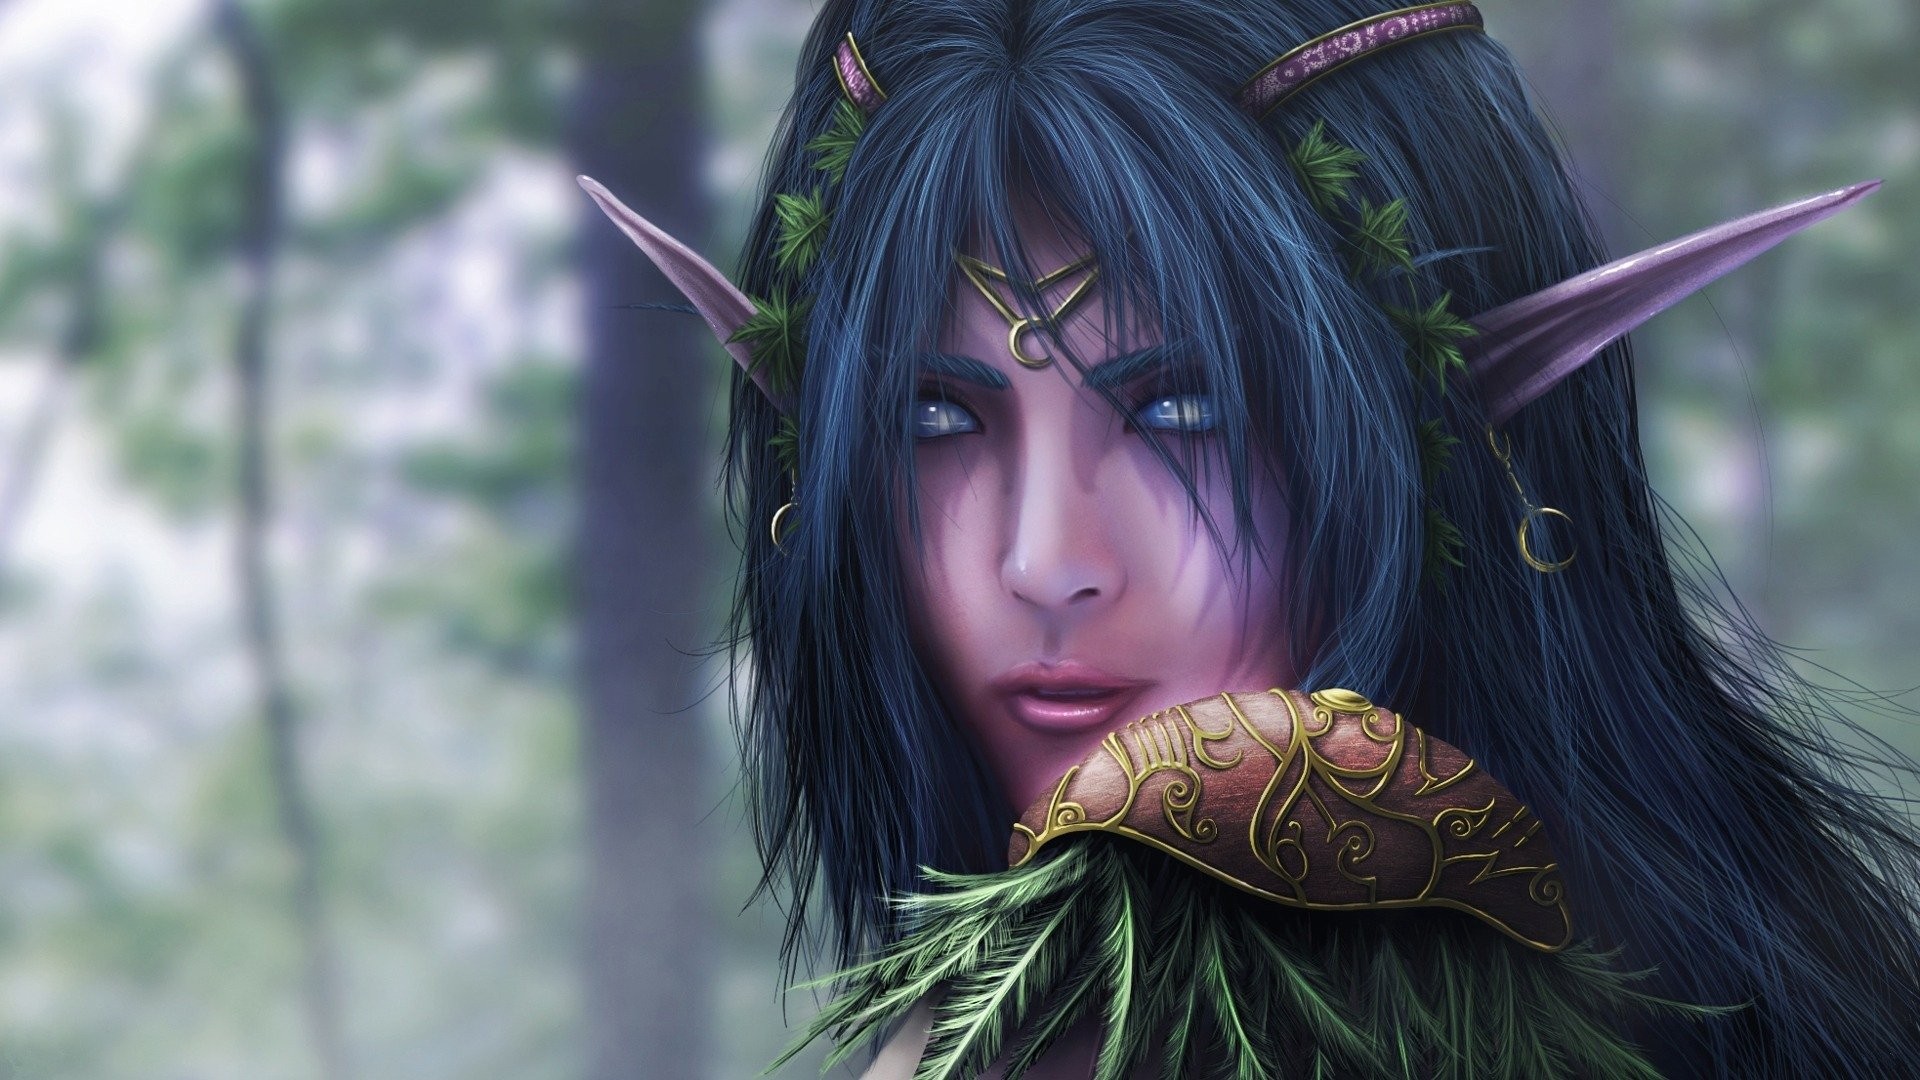 General 1920x1080 elves World of Warcraft Blizzard Entertainment video games fantasy girl PC gaming pointy ears fantasy art video game girls face closeup